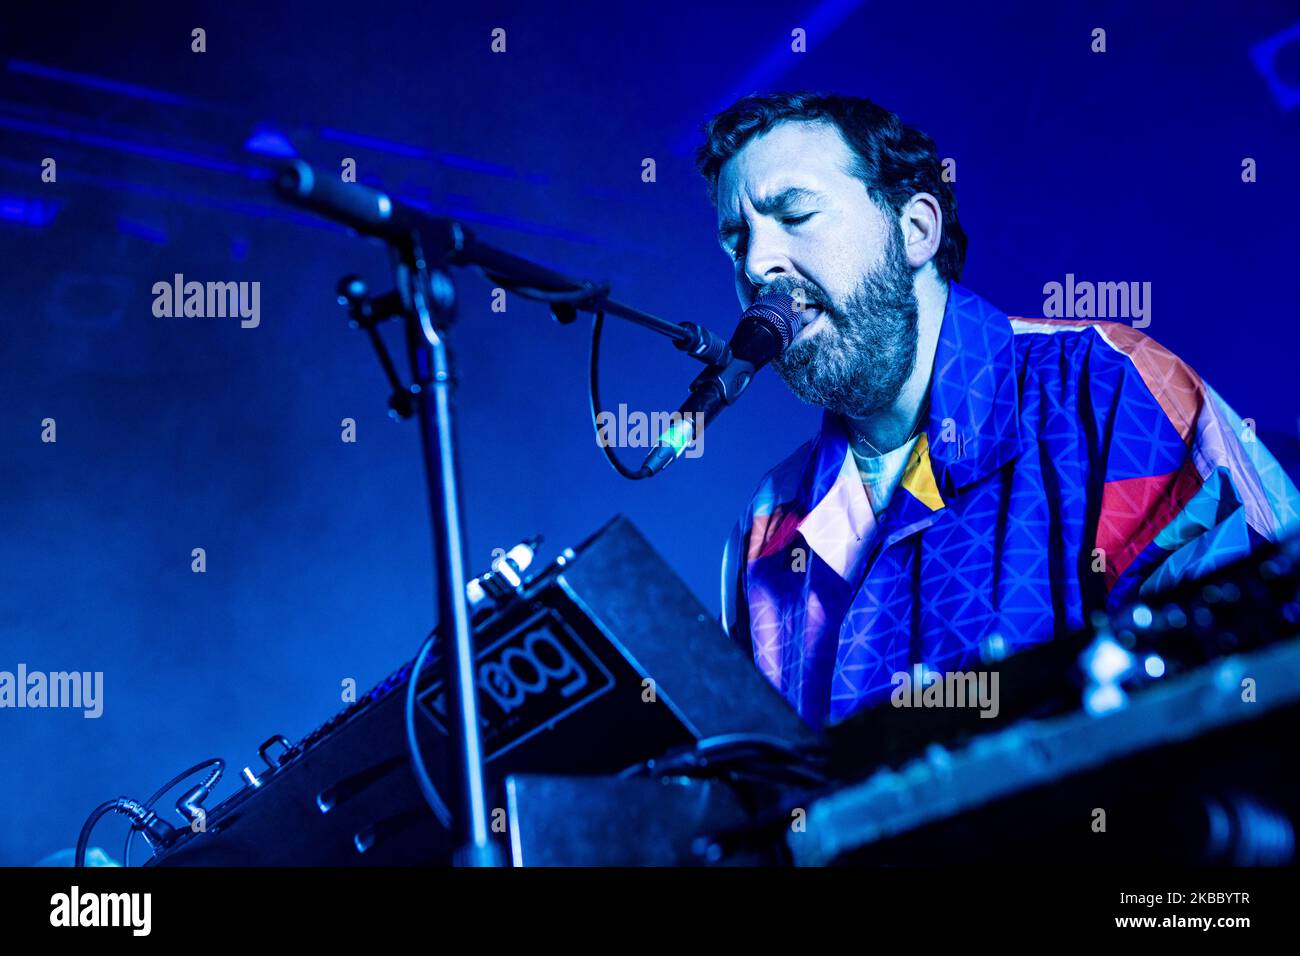 Joe Goddard of English synth-pop band Hot chip performs at Alcatraz in Milano, Italy, on November 30 2019. The group consists of multi-instrumentalists Alexis Taylor, and Felix Martin. They are occasionally supplemented by Rob Smoughton and Sarah Jones for live performances and studio recordings. The group primarily produces music in the synth-pop and alternative dance genres, drawing influences from house and disco. (Photo by Mairo Cinquetti/NurPhoto) Stock Photo